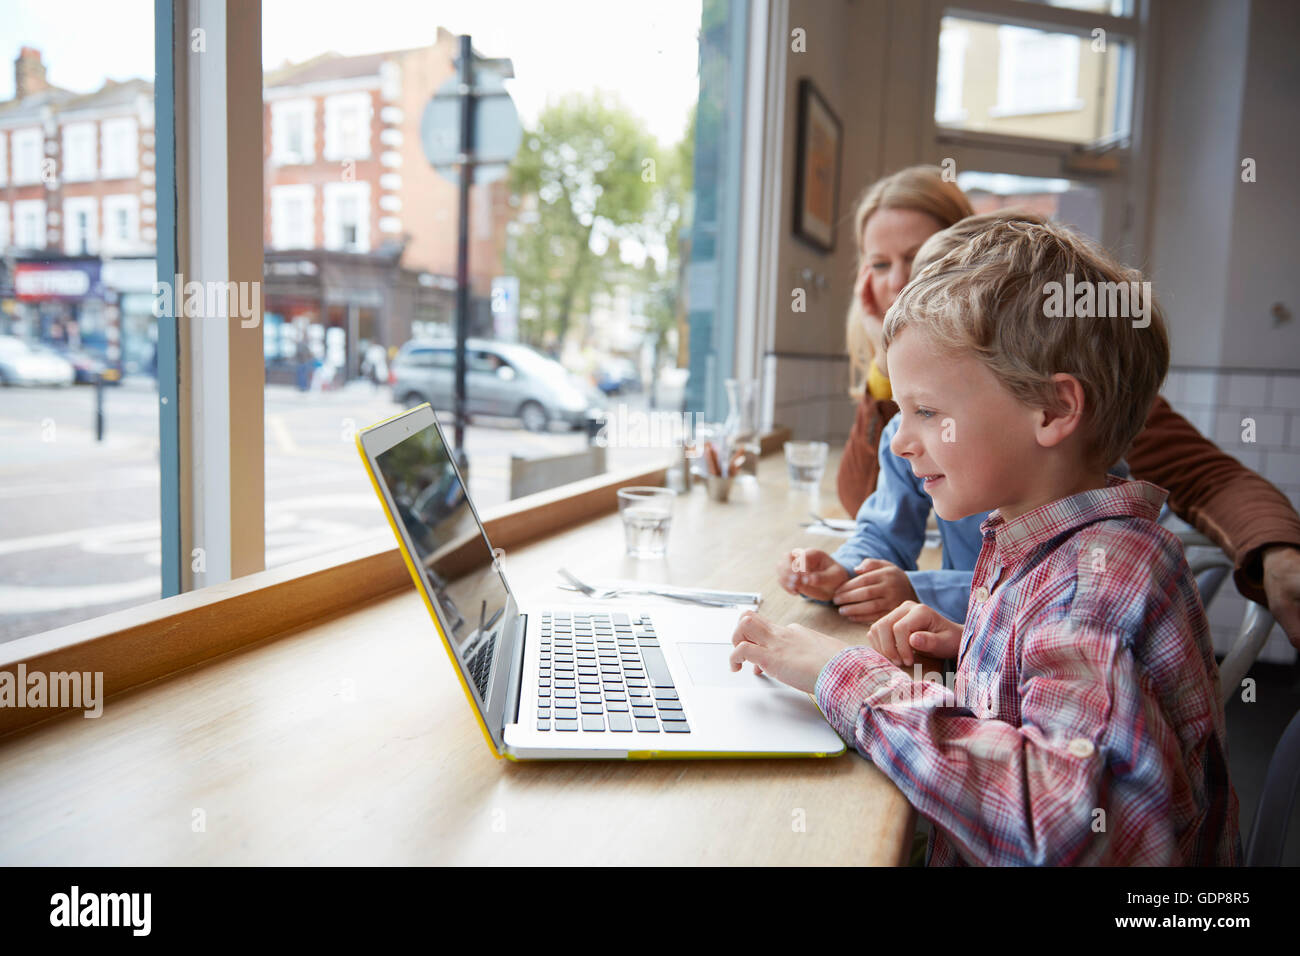 Mother and son at window seat in cafe using laptop Stock Photo